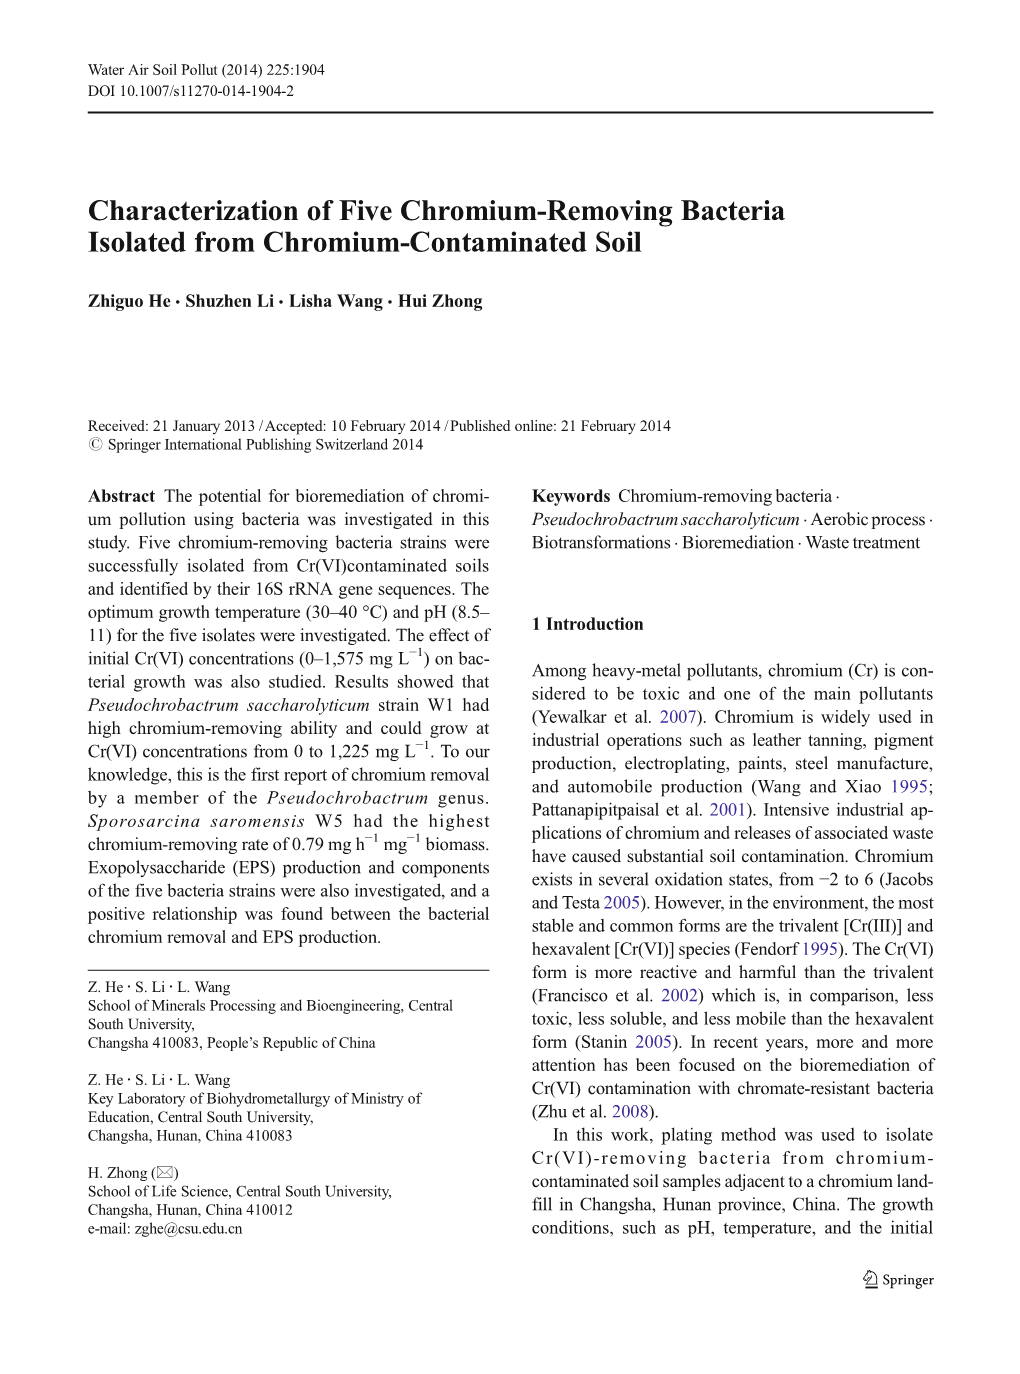 Characterization of Five Chromium-Removing Bacteria Isolated from Chromium-Contaminated Soil